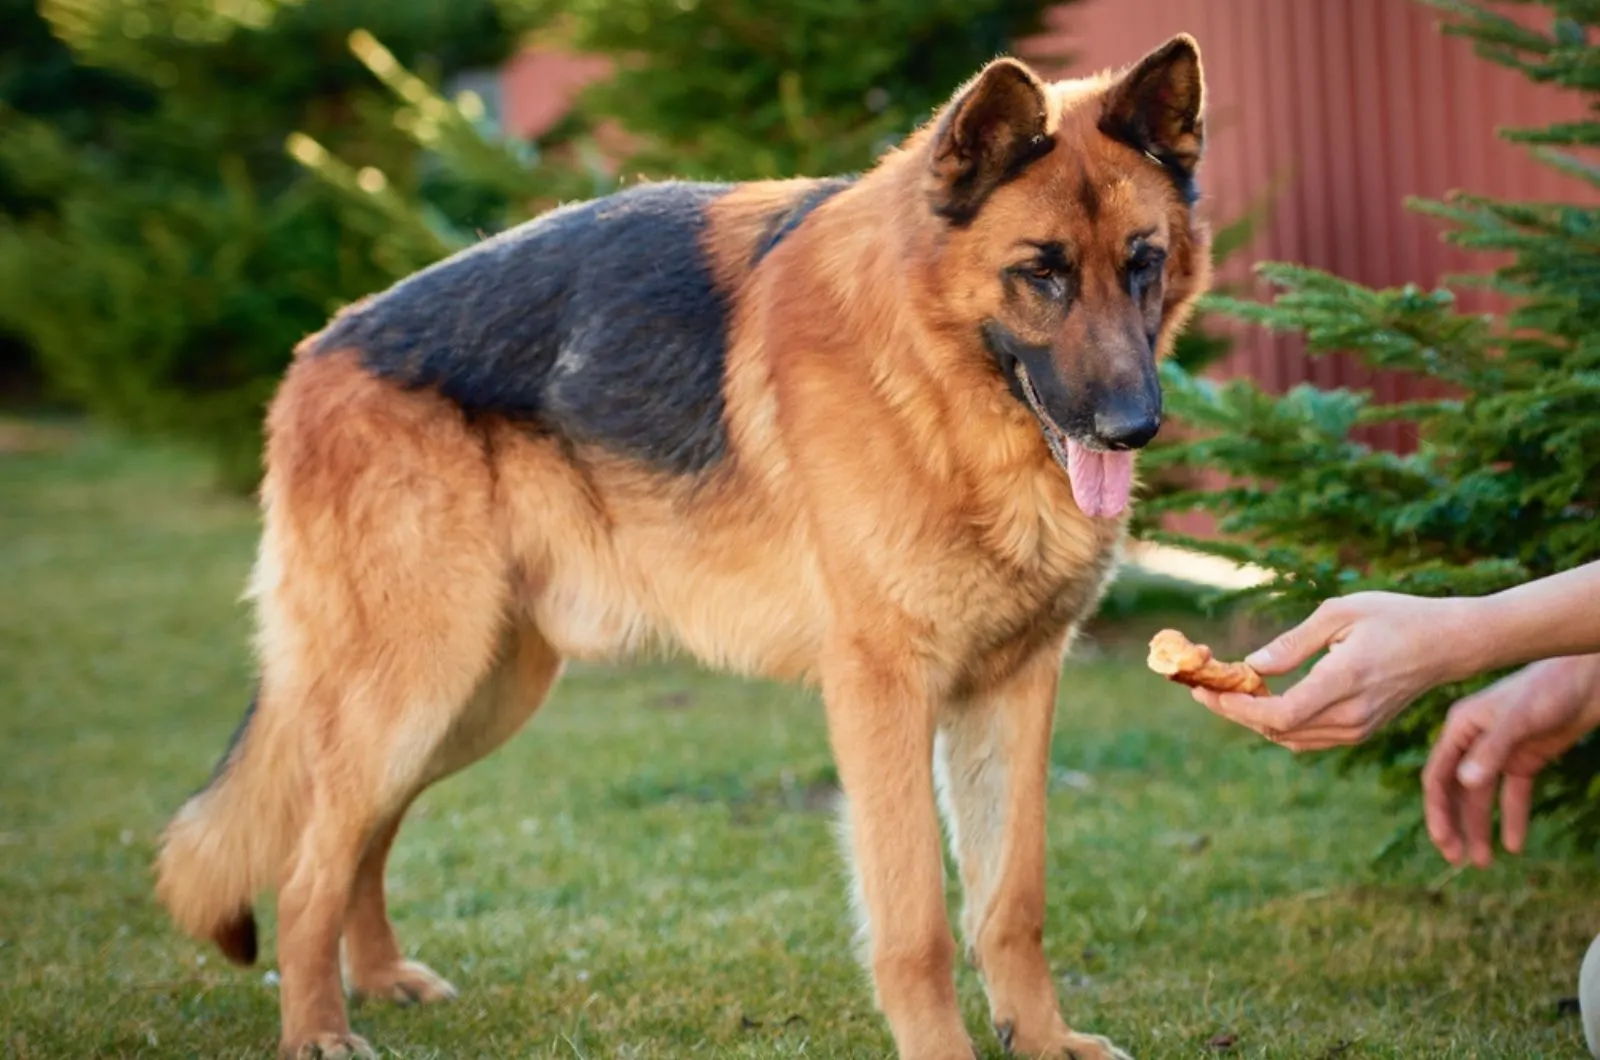 red and black german shepherd dog looks at a piece of bread in a person's hand